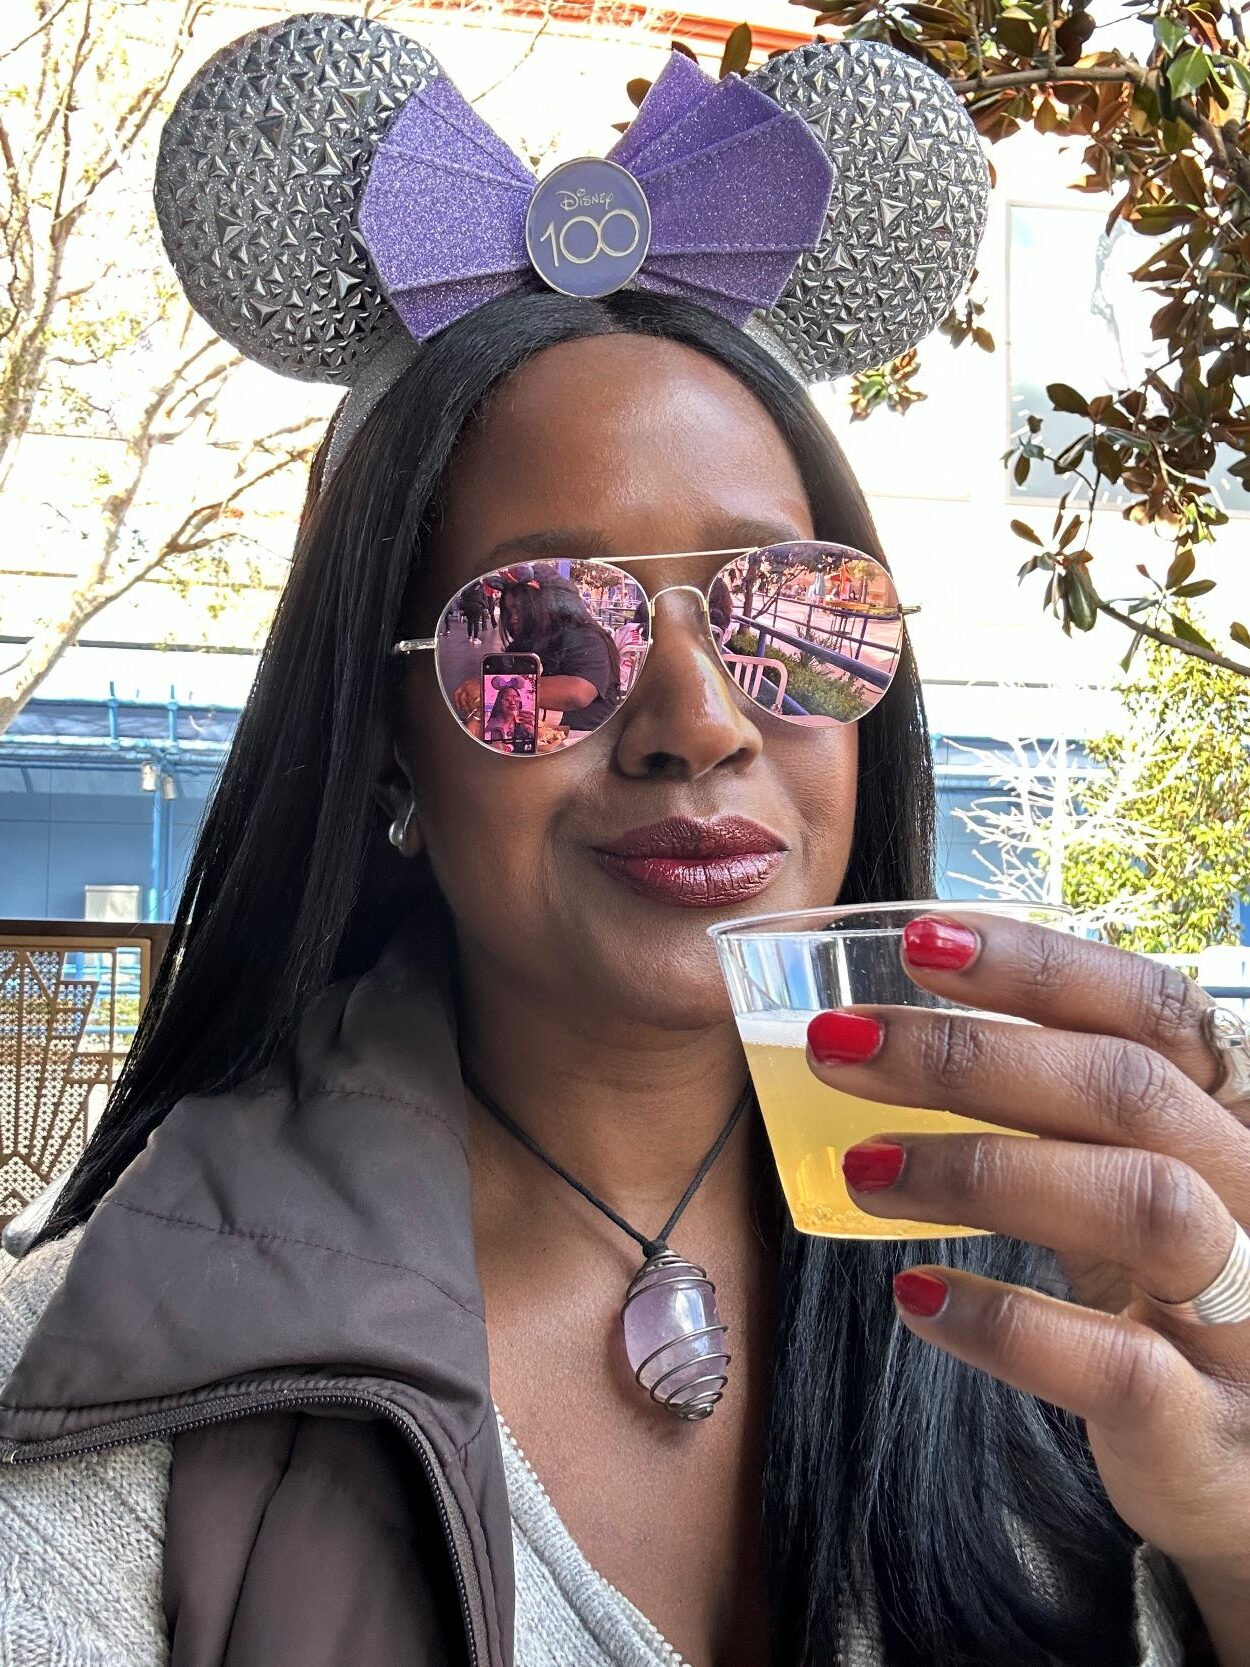 An image of lifestyle blogger Ariel Johns sipping a mimosa as the Disney California Adventure Food & Wine Festival.